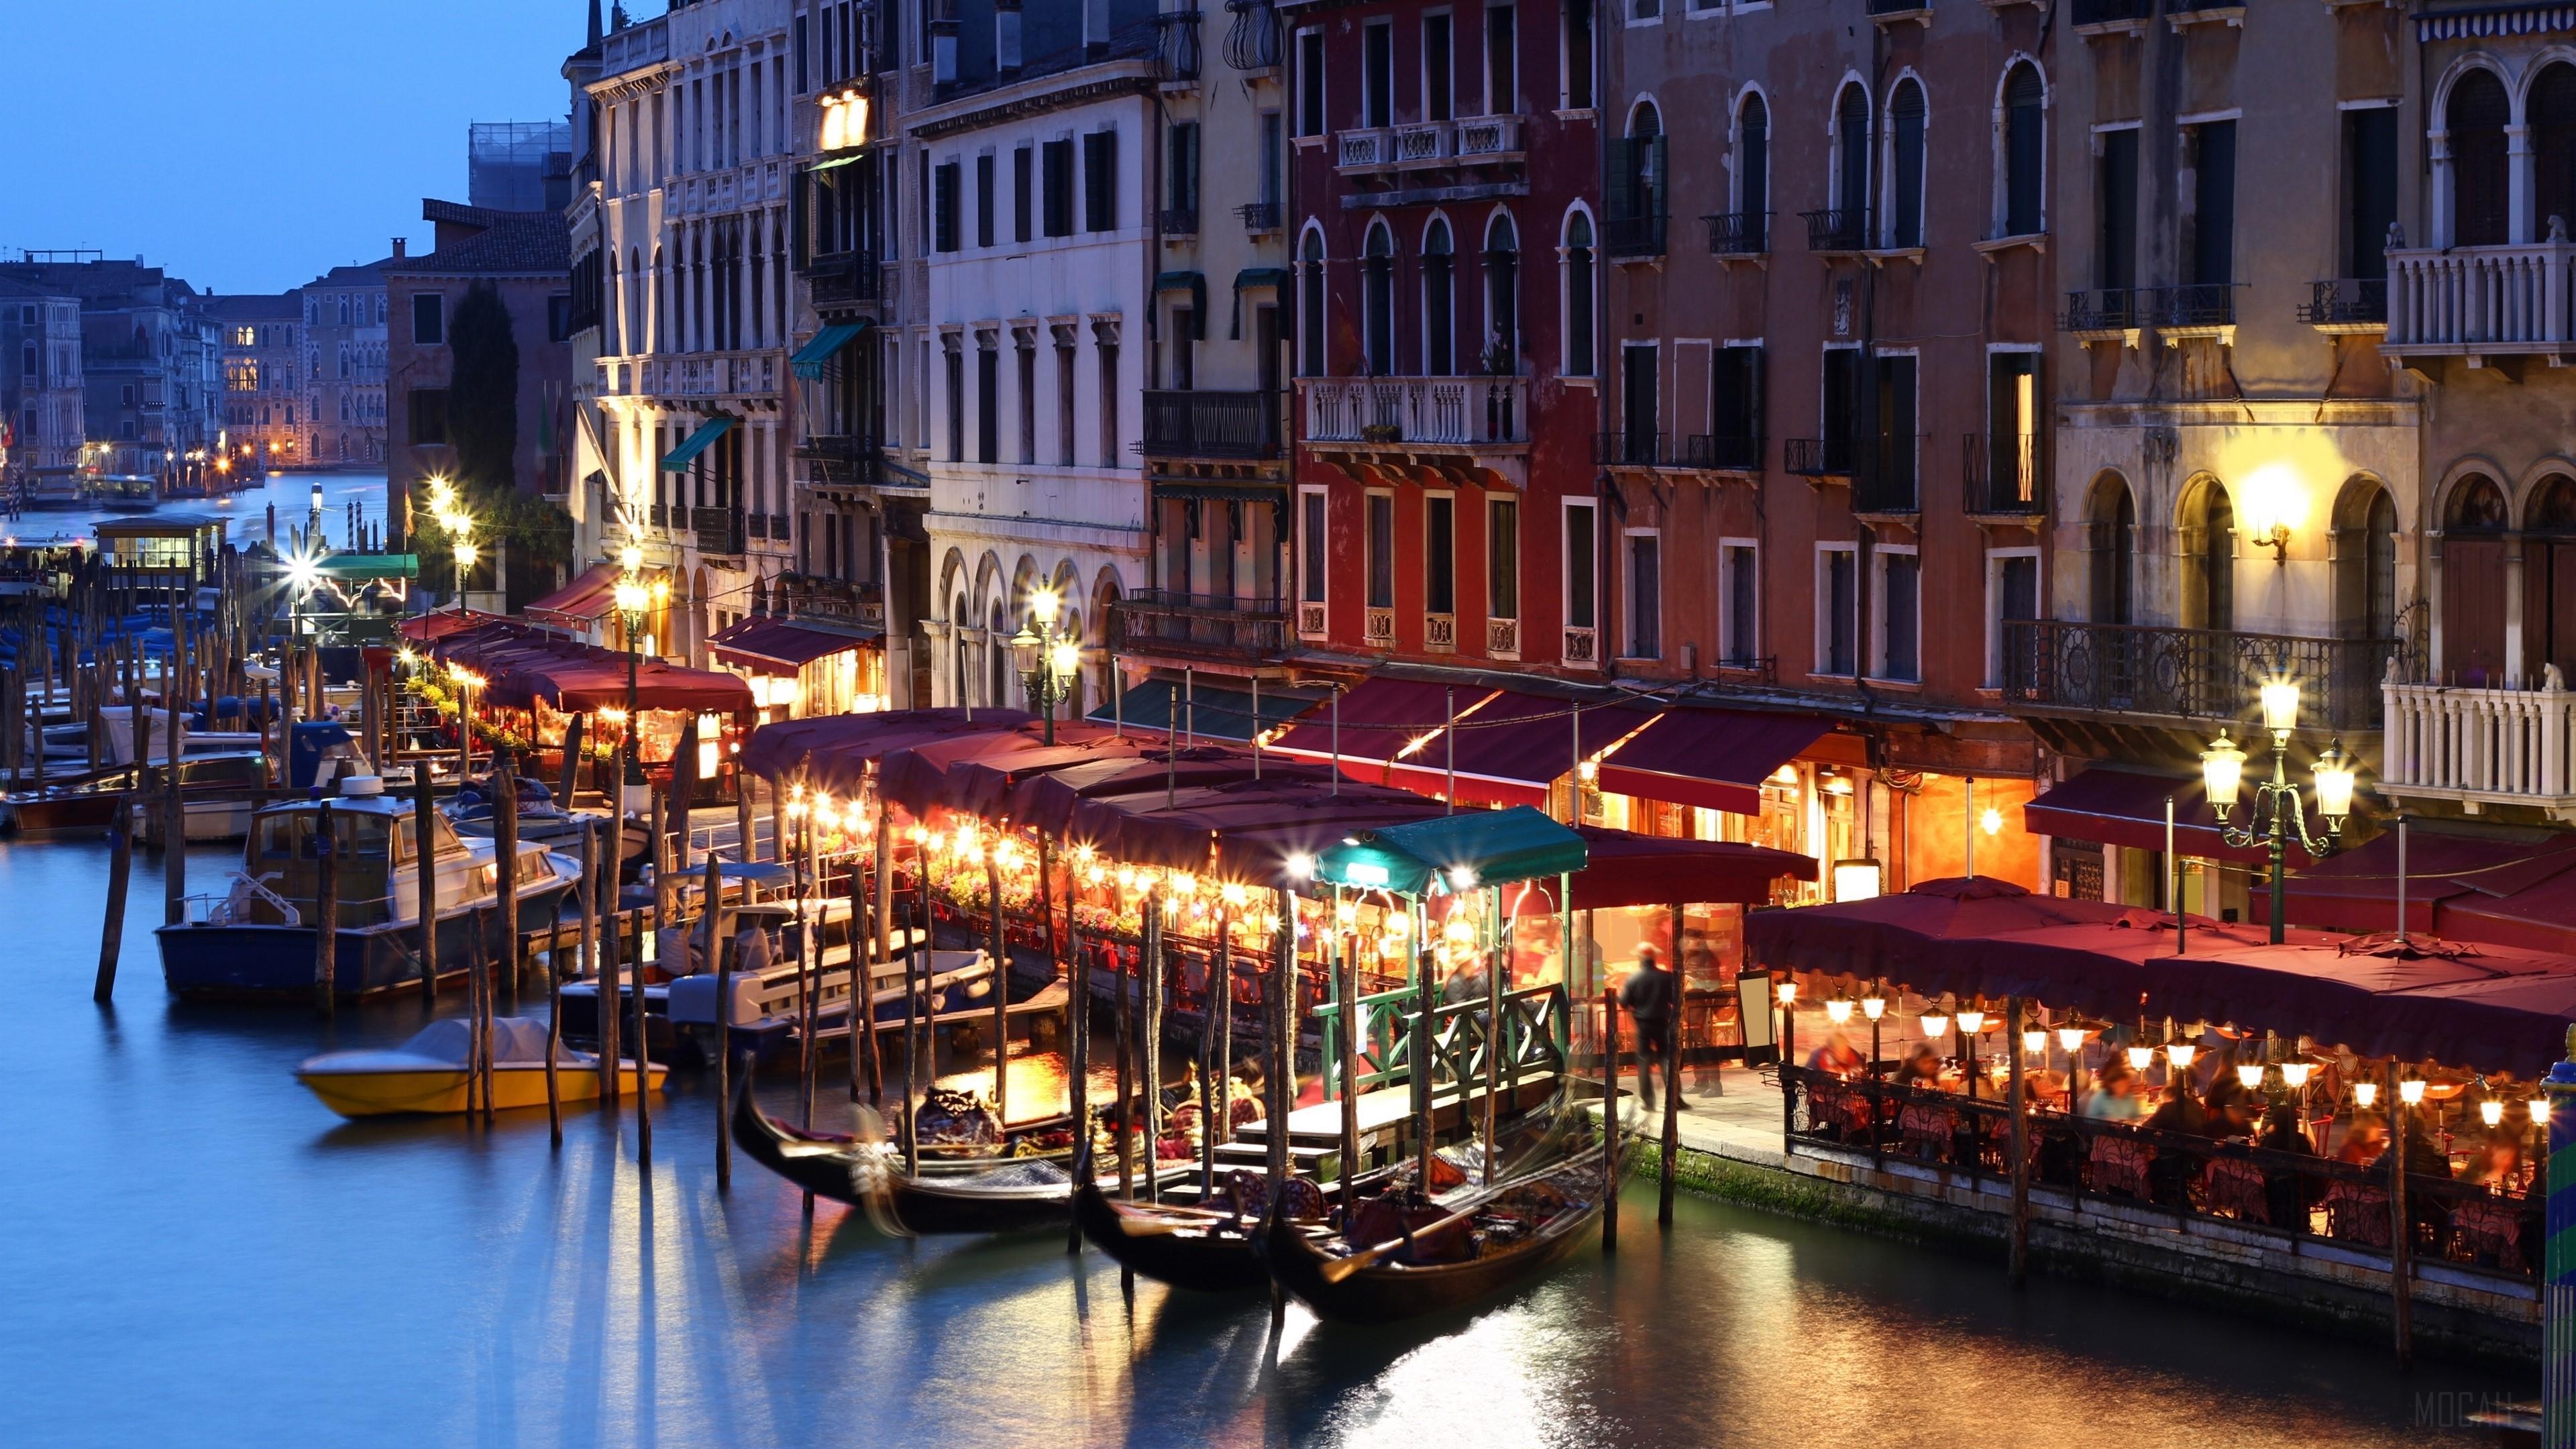 HD wallpaper, Boats 4K, Gondola, People, Italy, Lights, Canal, House, Evening, Cafe, Building, Venice